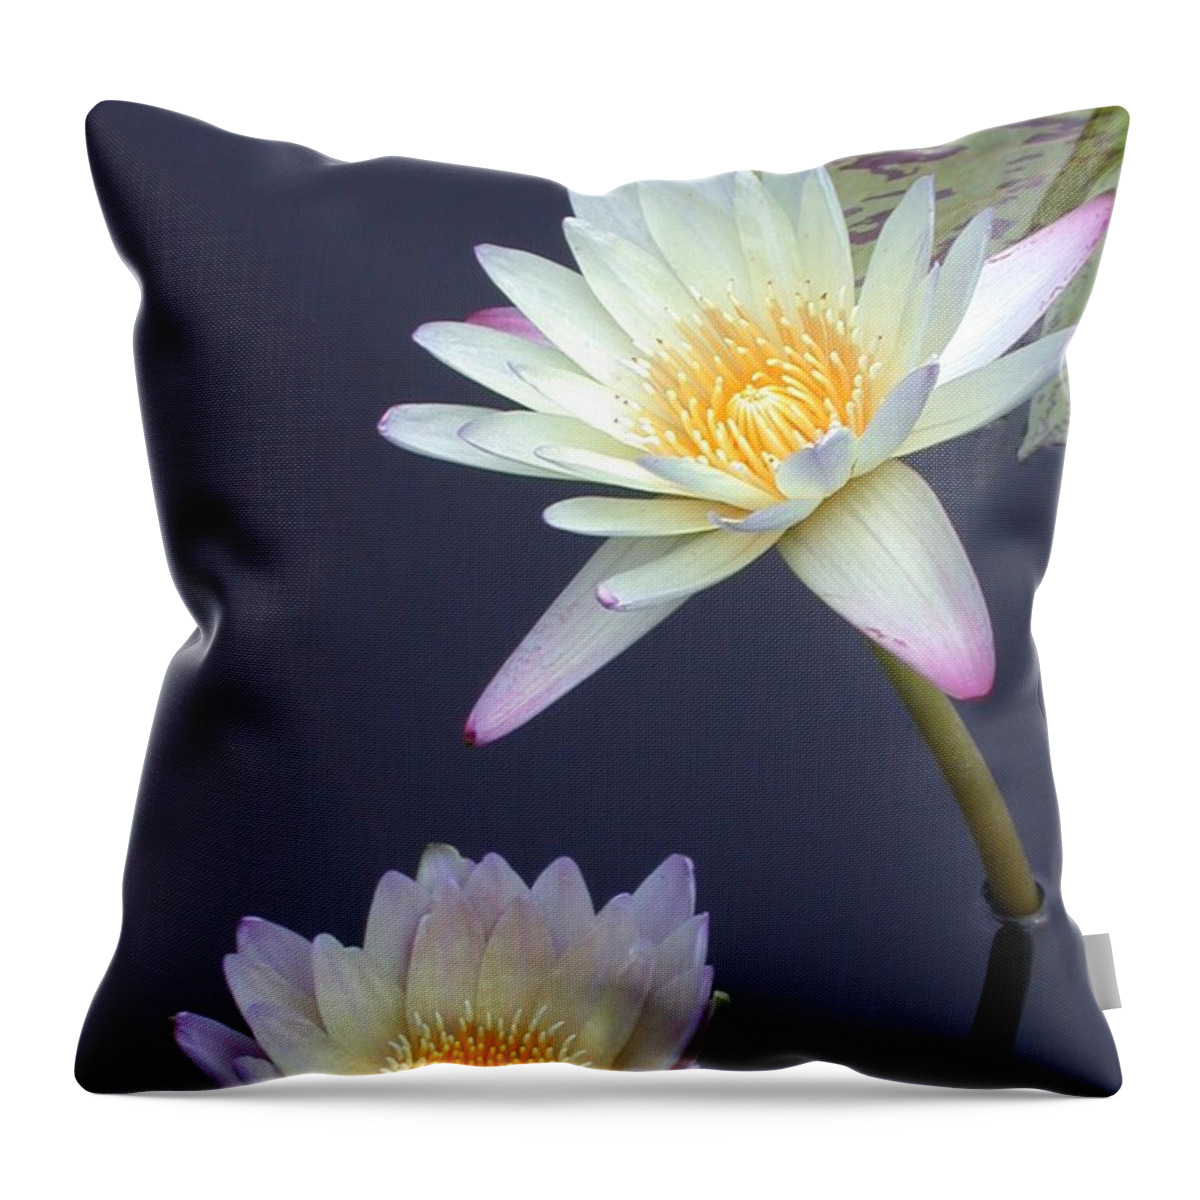 Water Lily Throw Pillow featuring the photograph In The Pond by Living Color Photography Lorraine Lynch